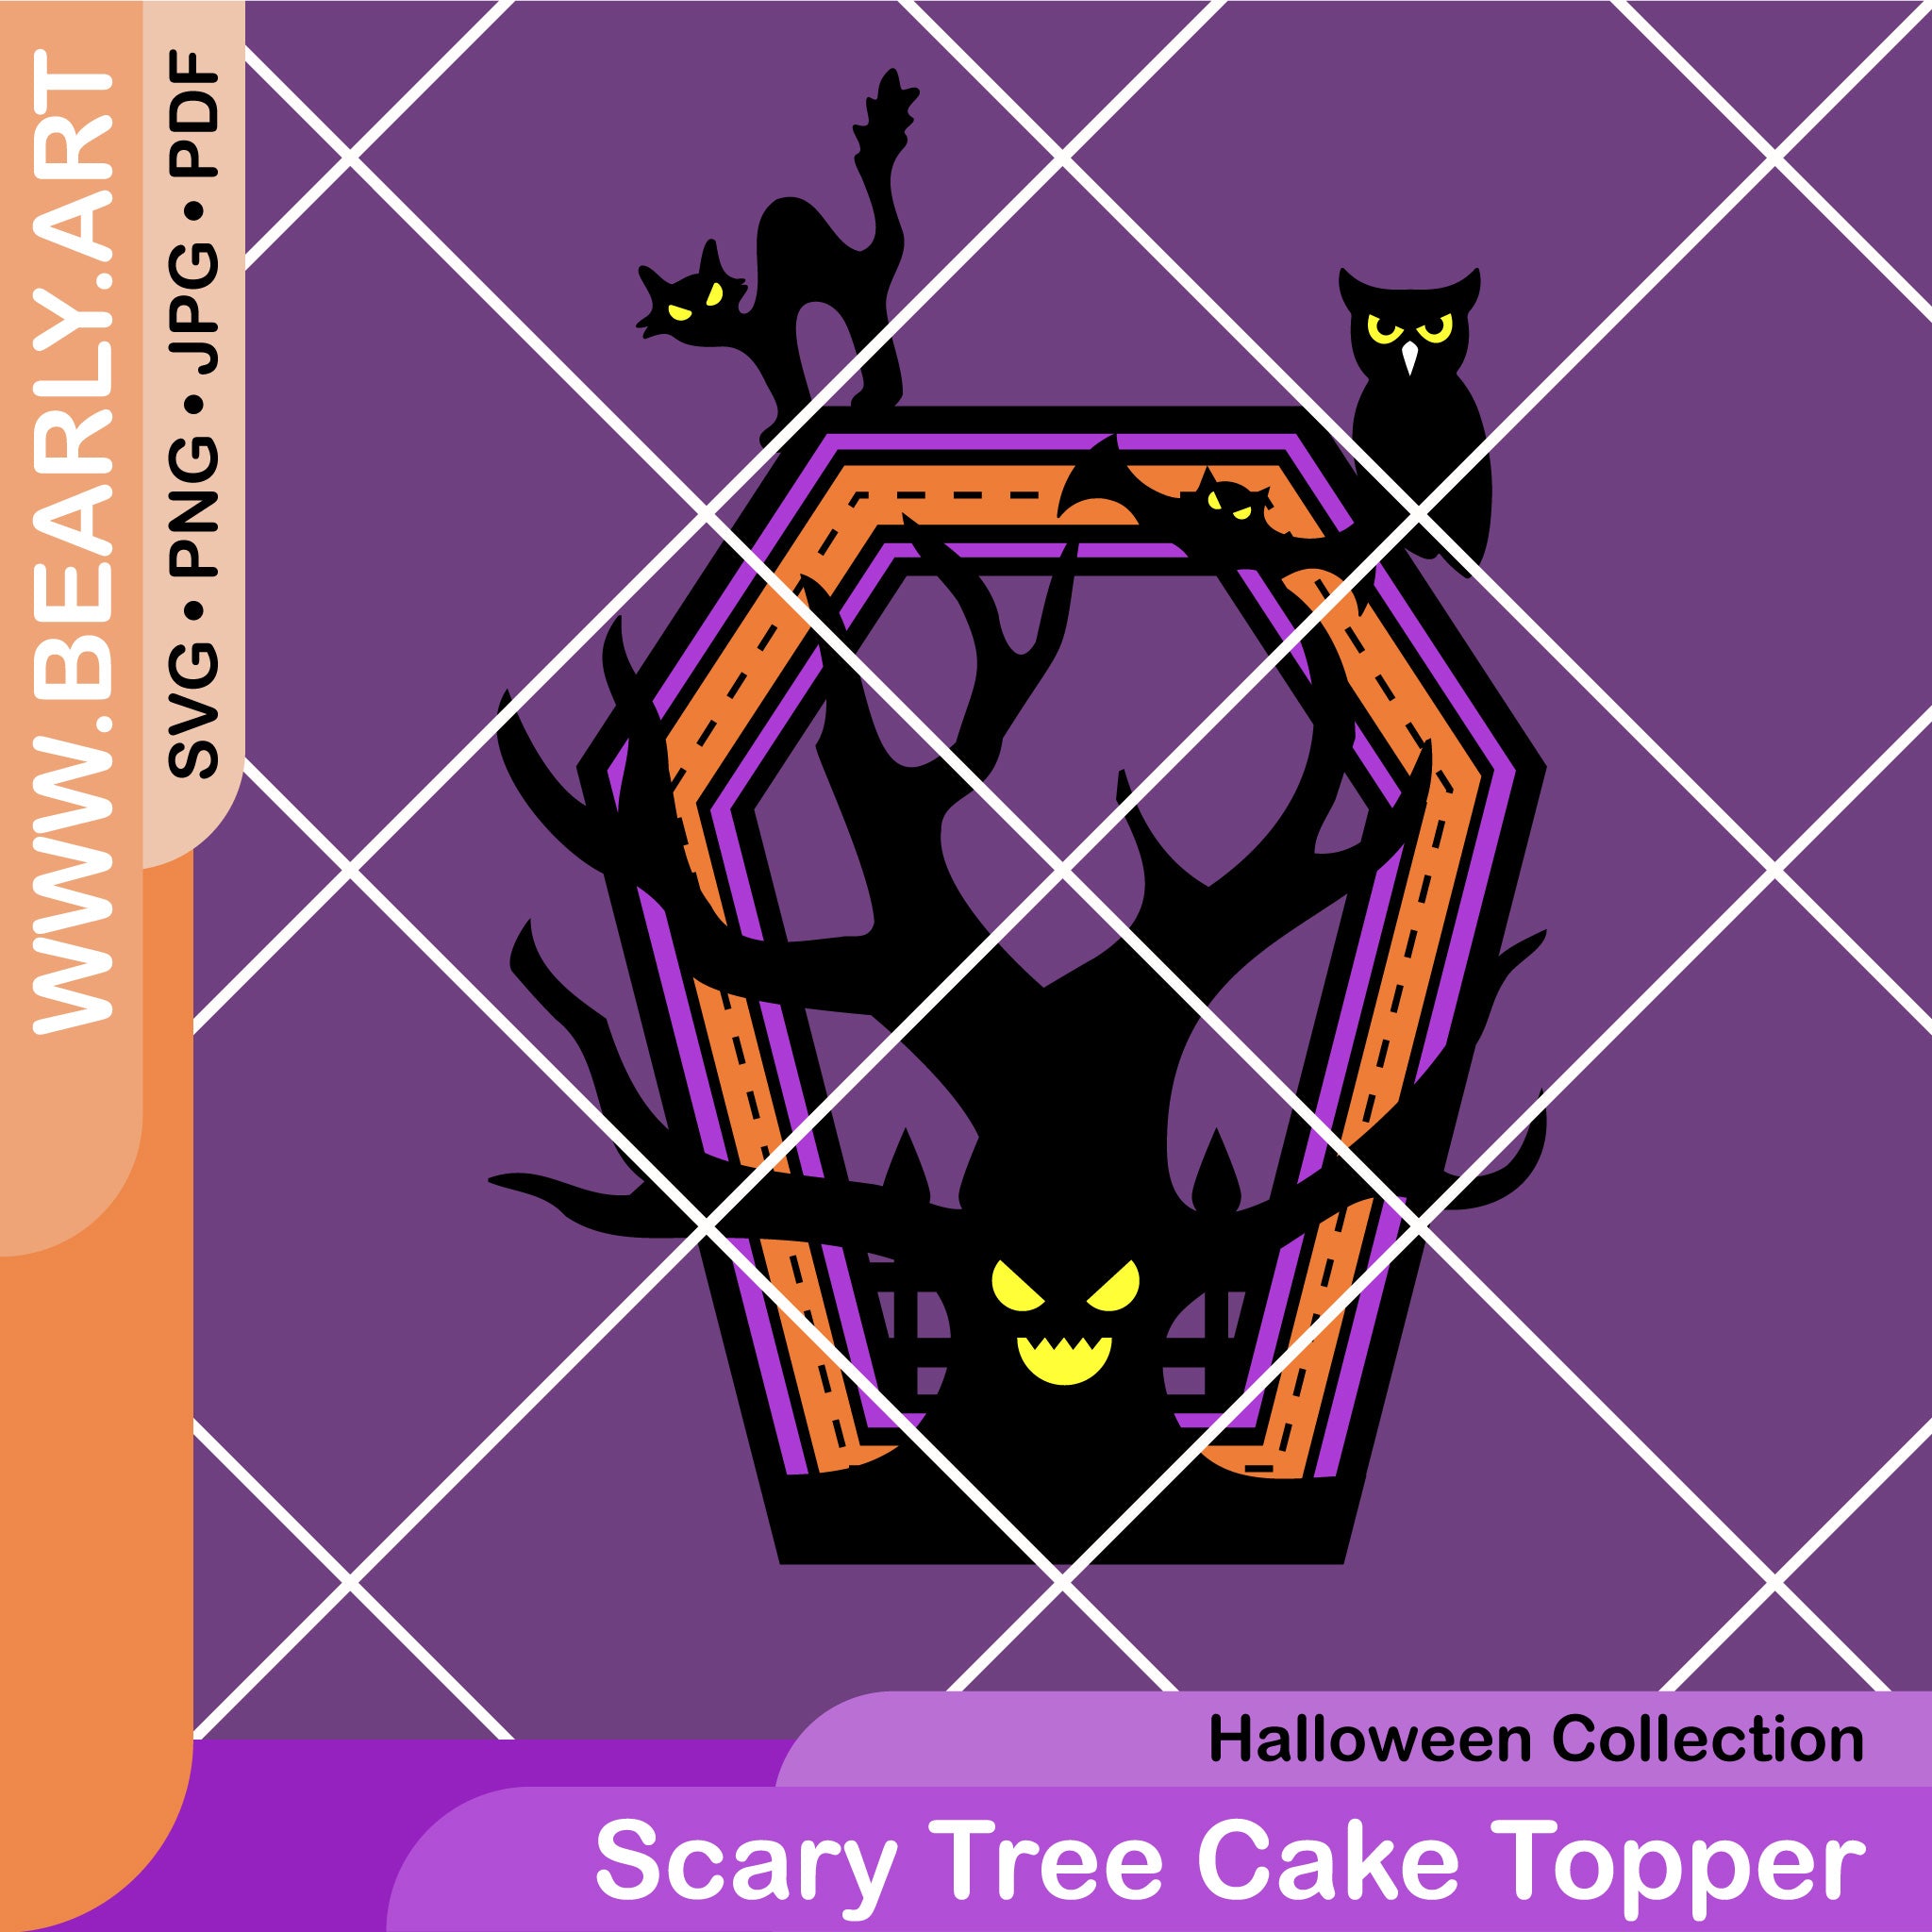 Scary Tree Cake Topper